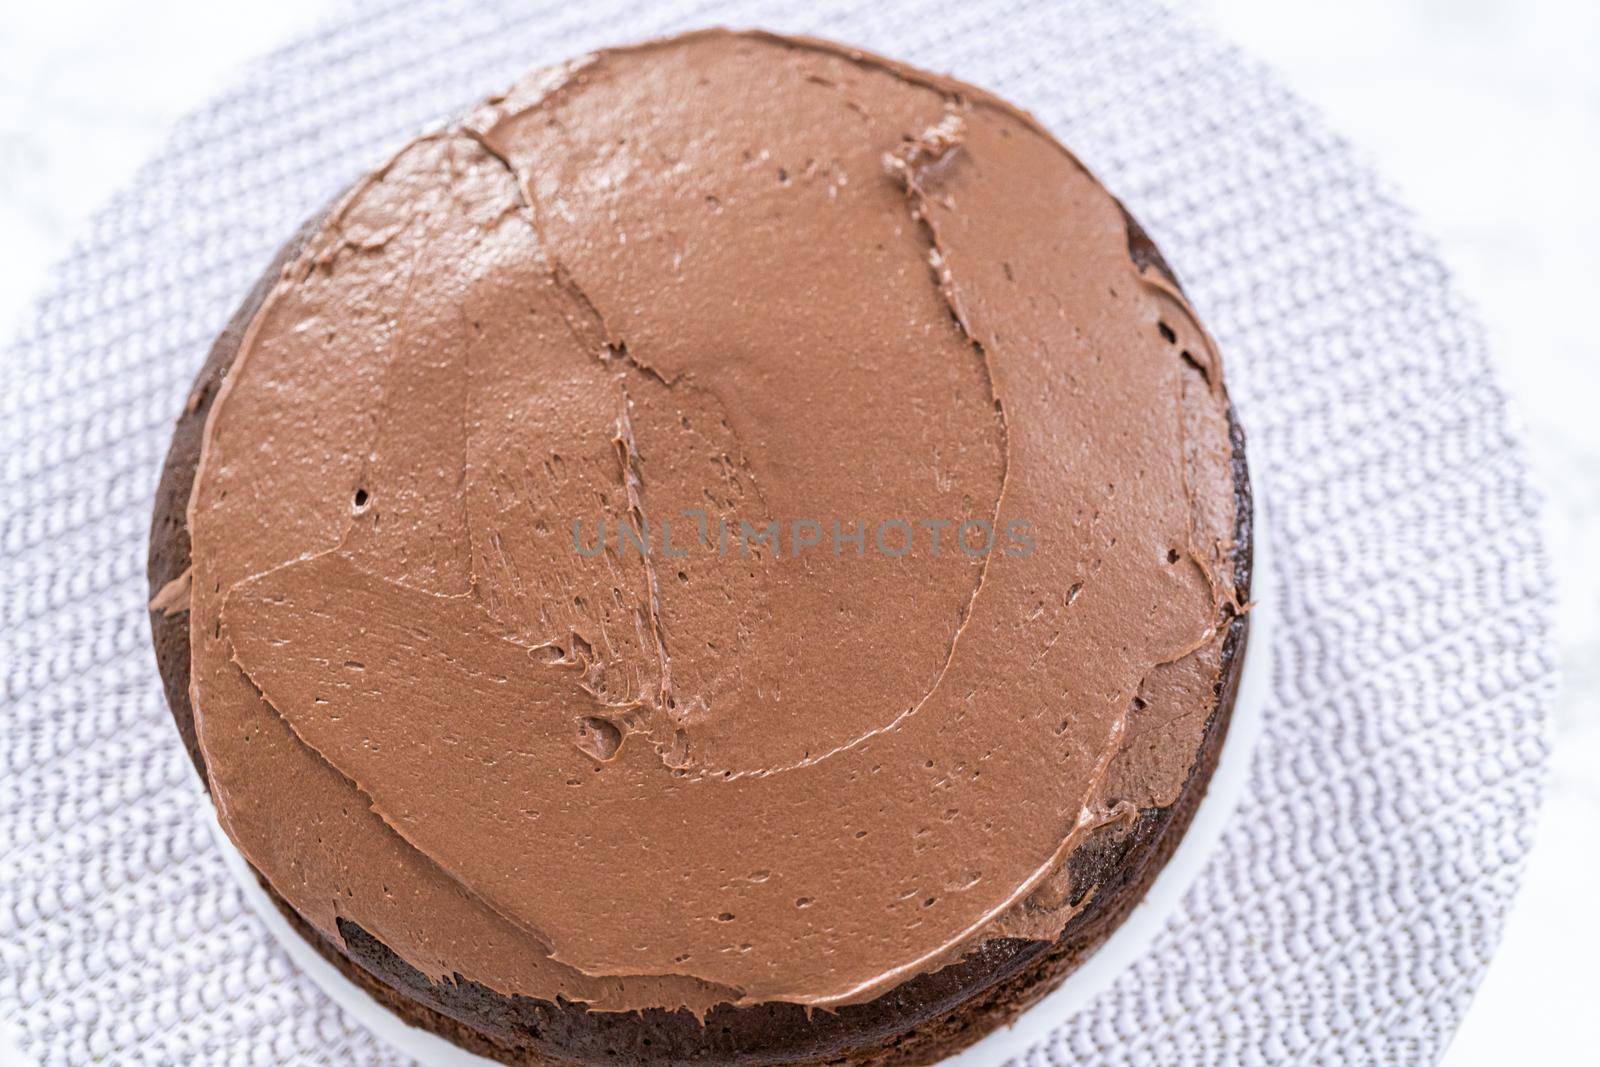 Covering chocolate cake with a crumb layer of chocolate buttercream frosting.